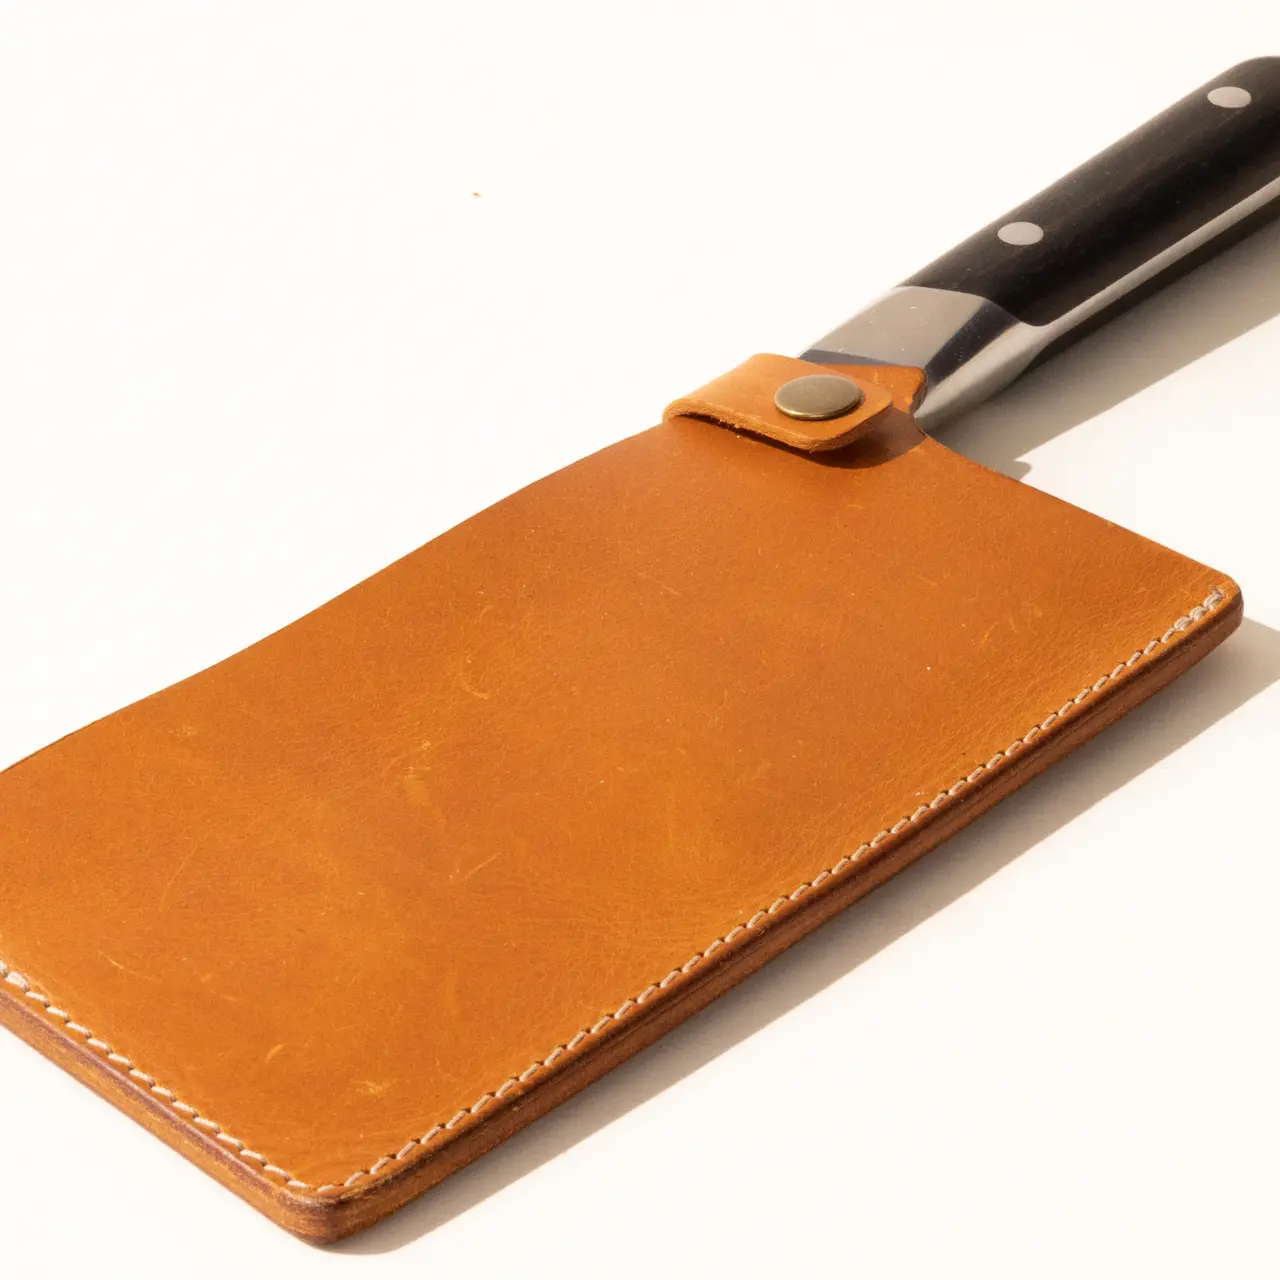 A kitchen knife with a black handle secured in a brown leather blade cover on a white background.